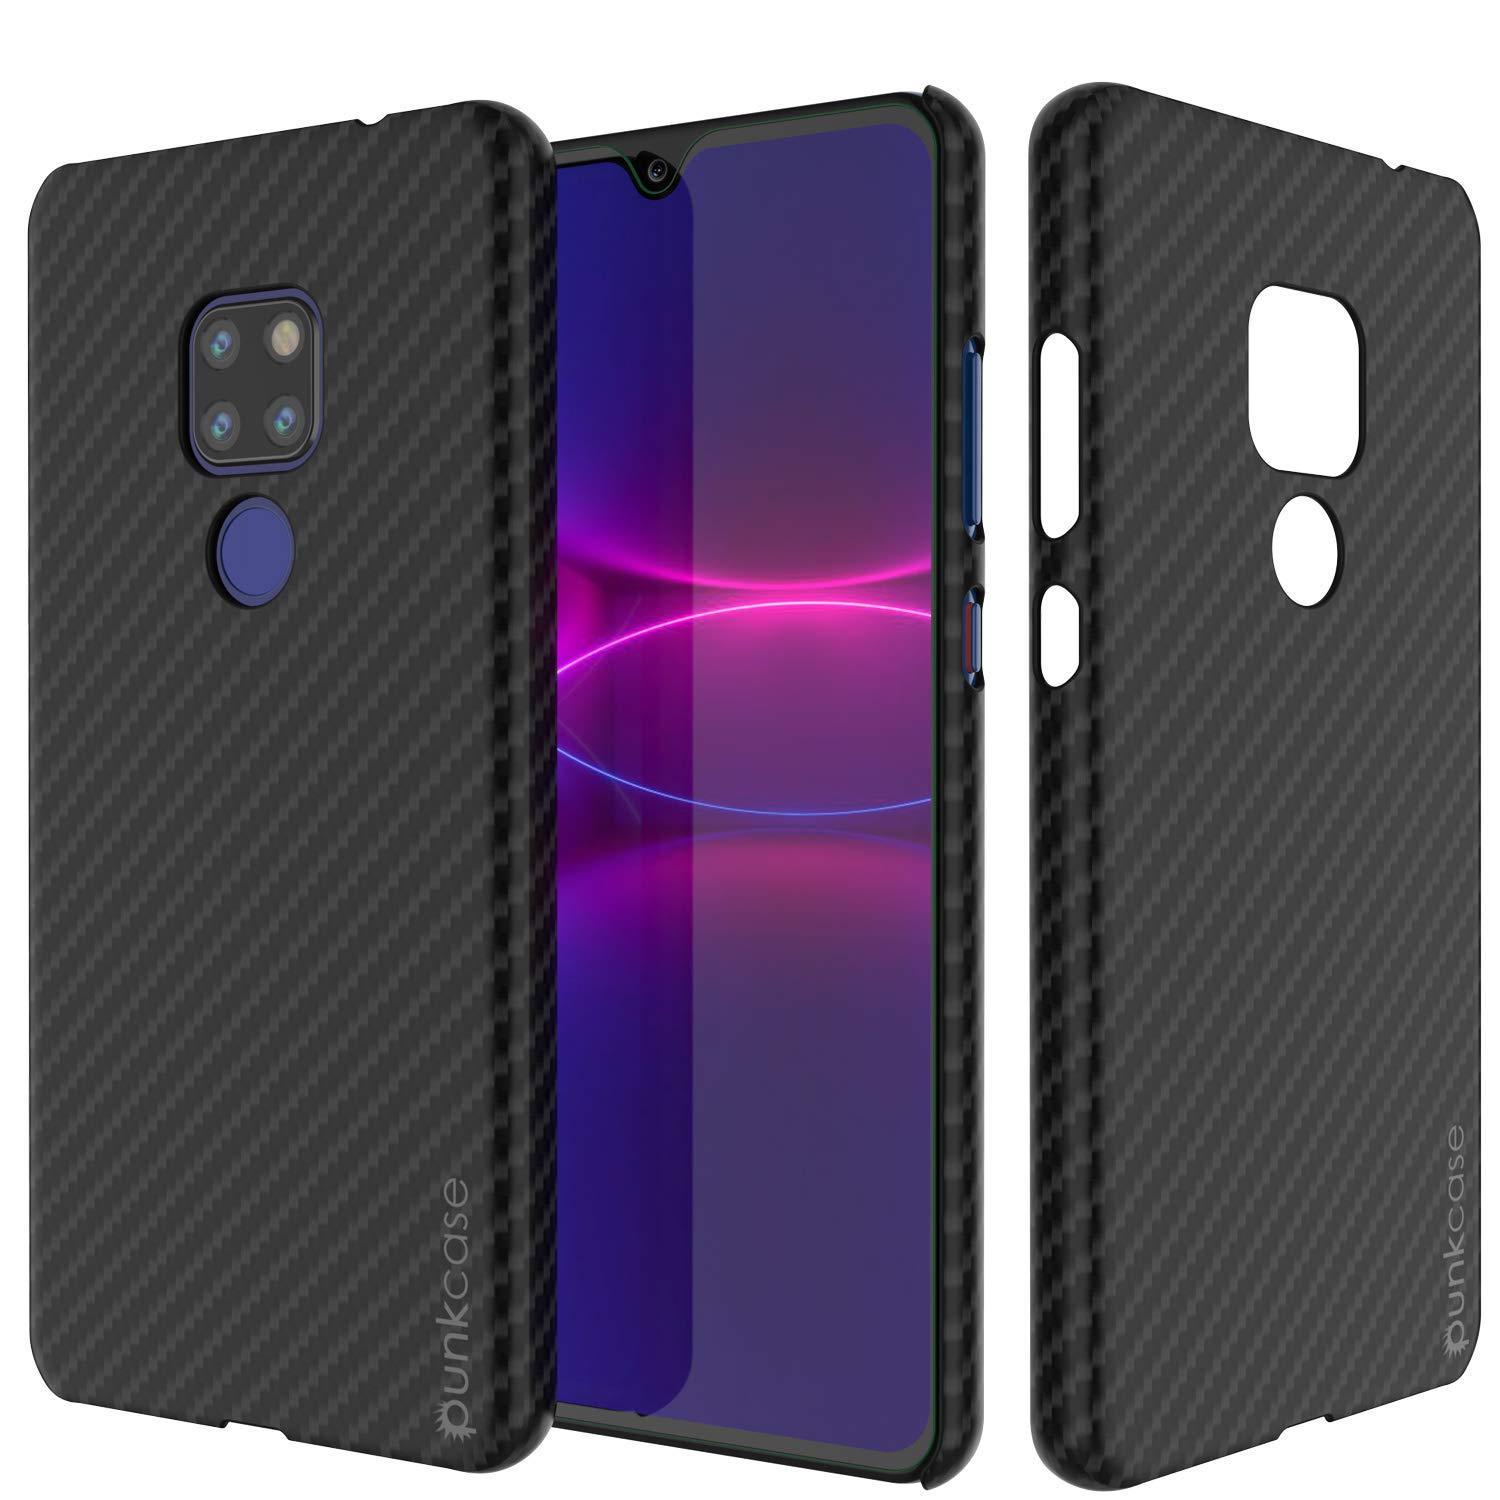 Huawei Mate 20 Pro Case, Punkcase CarbonShield, Heavy Duty [Black] Cover